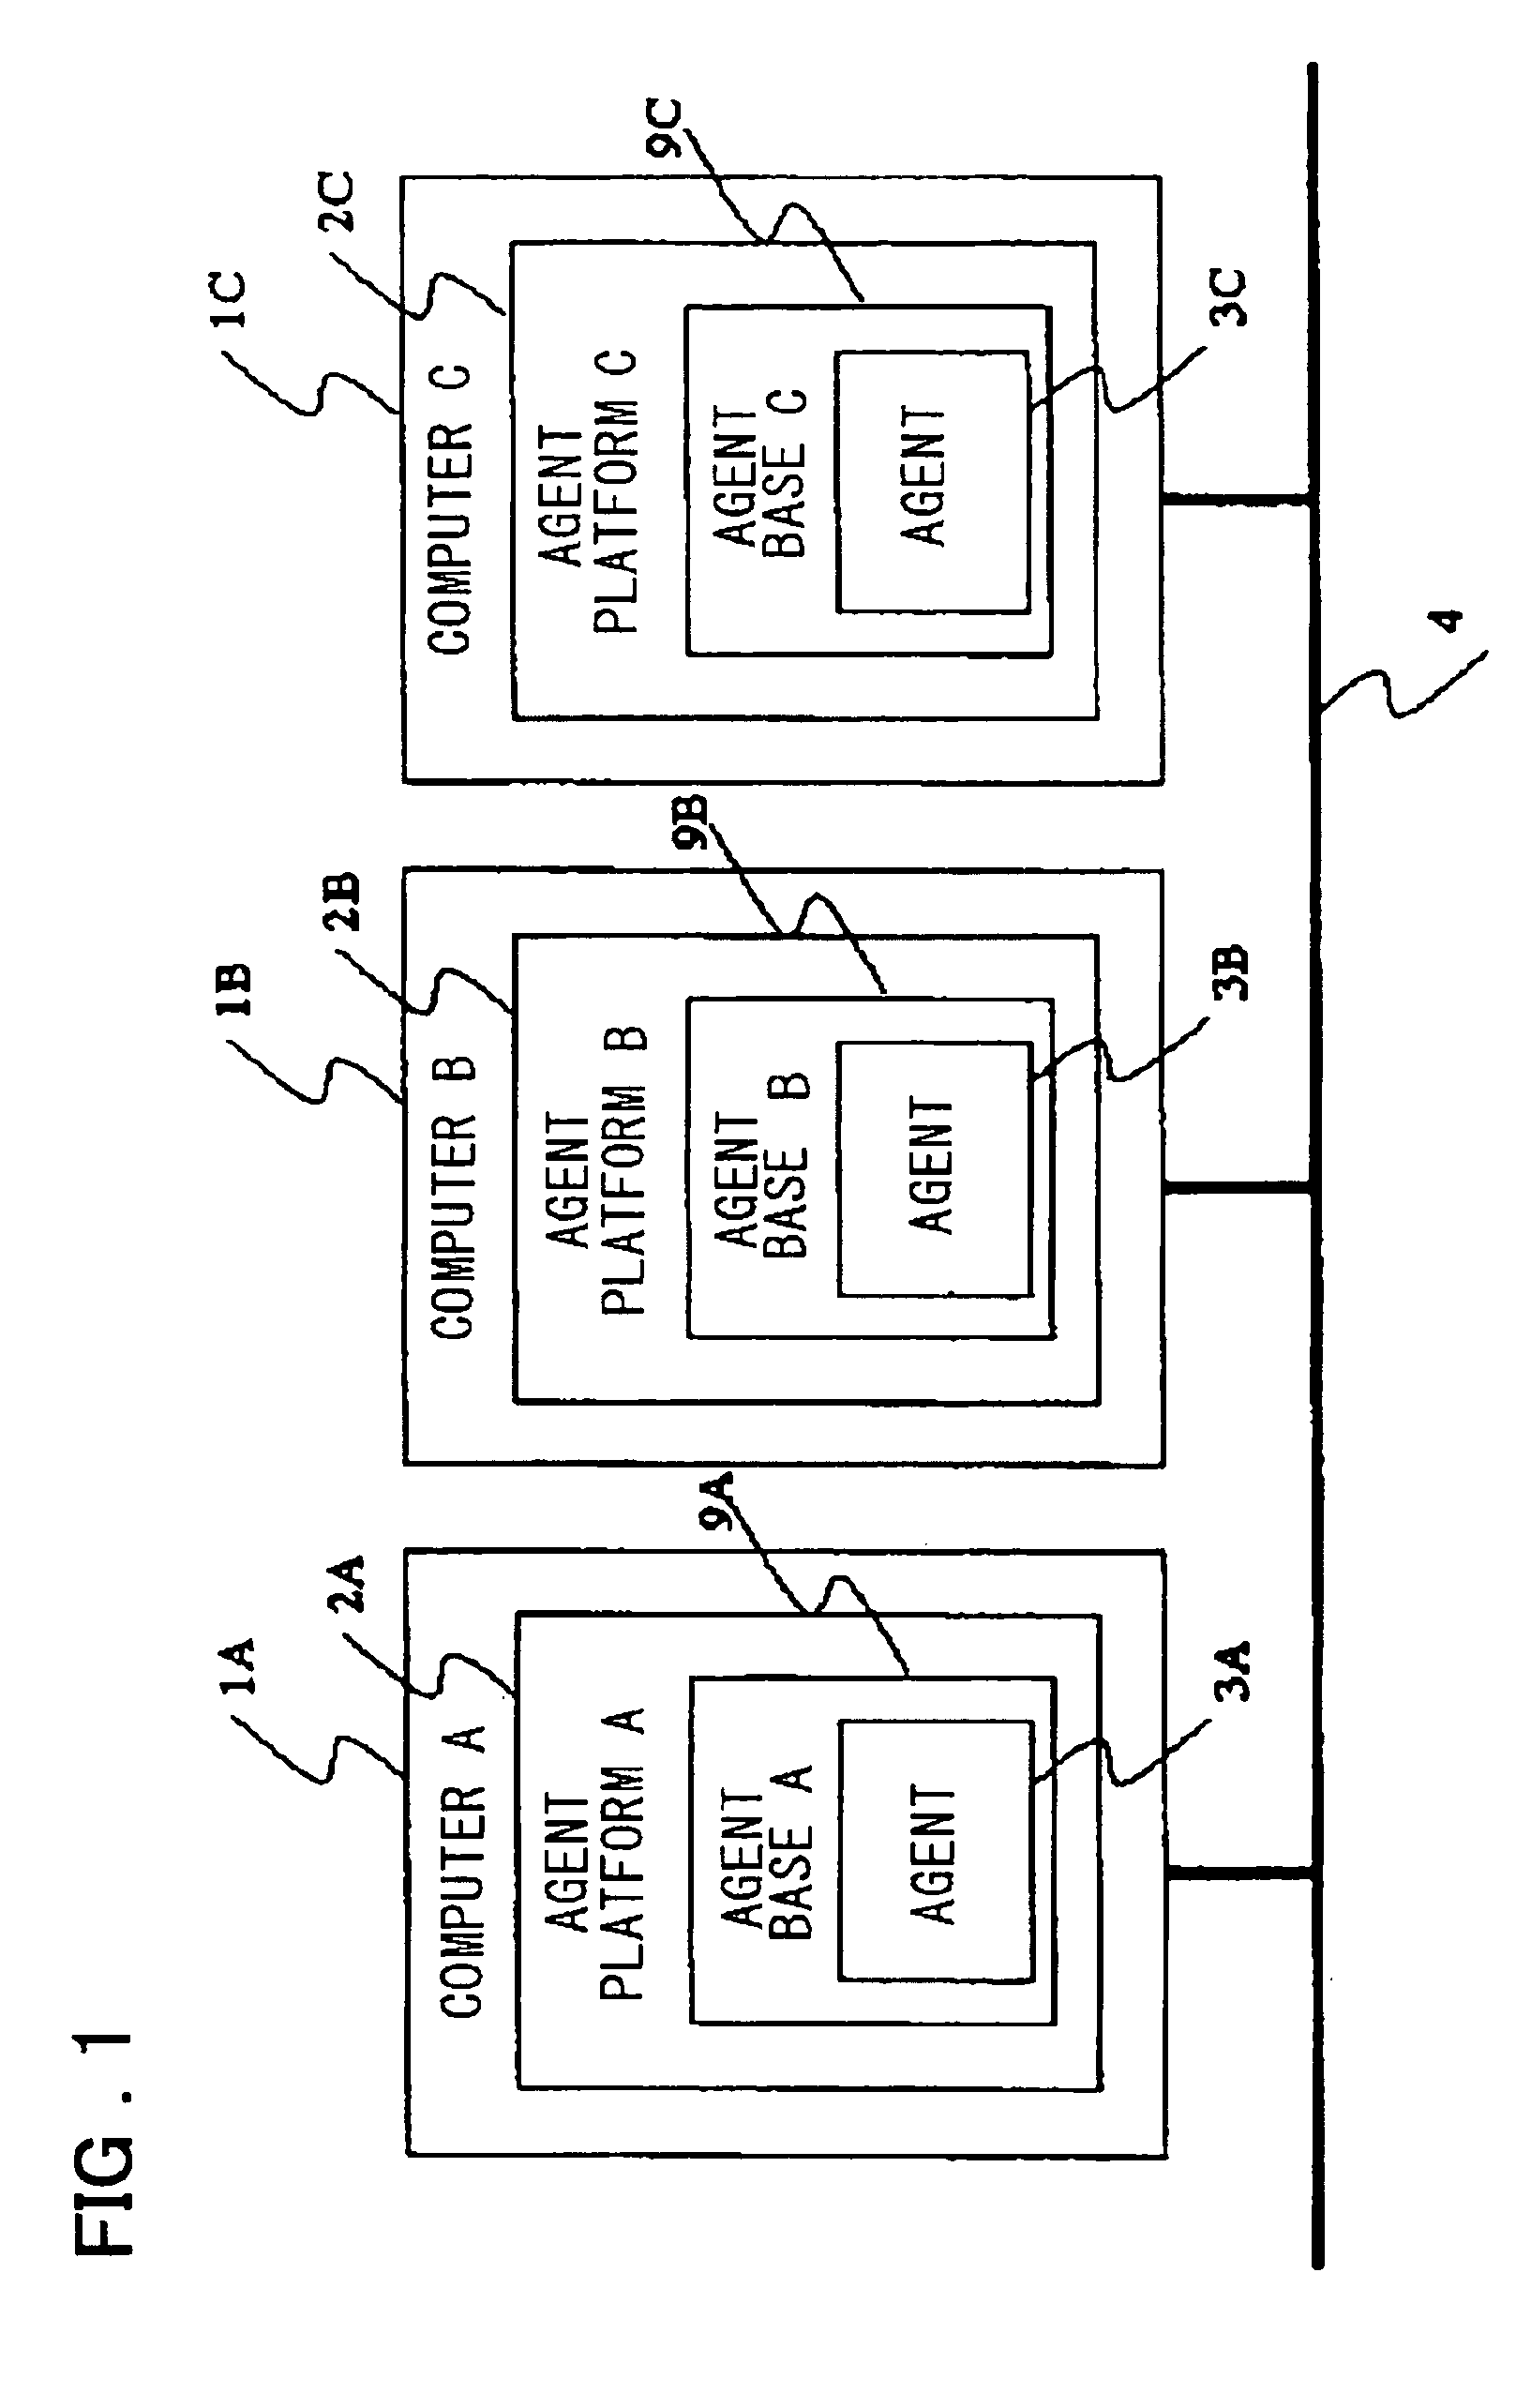 Distributed application control system, control method and a program